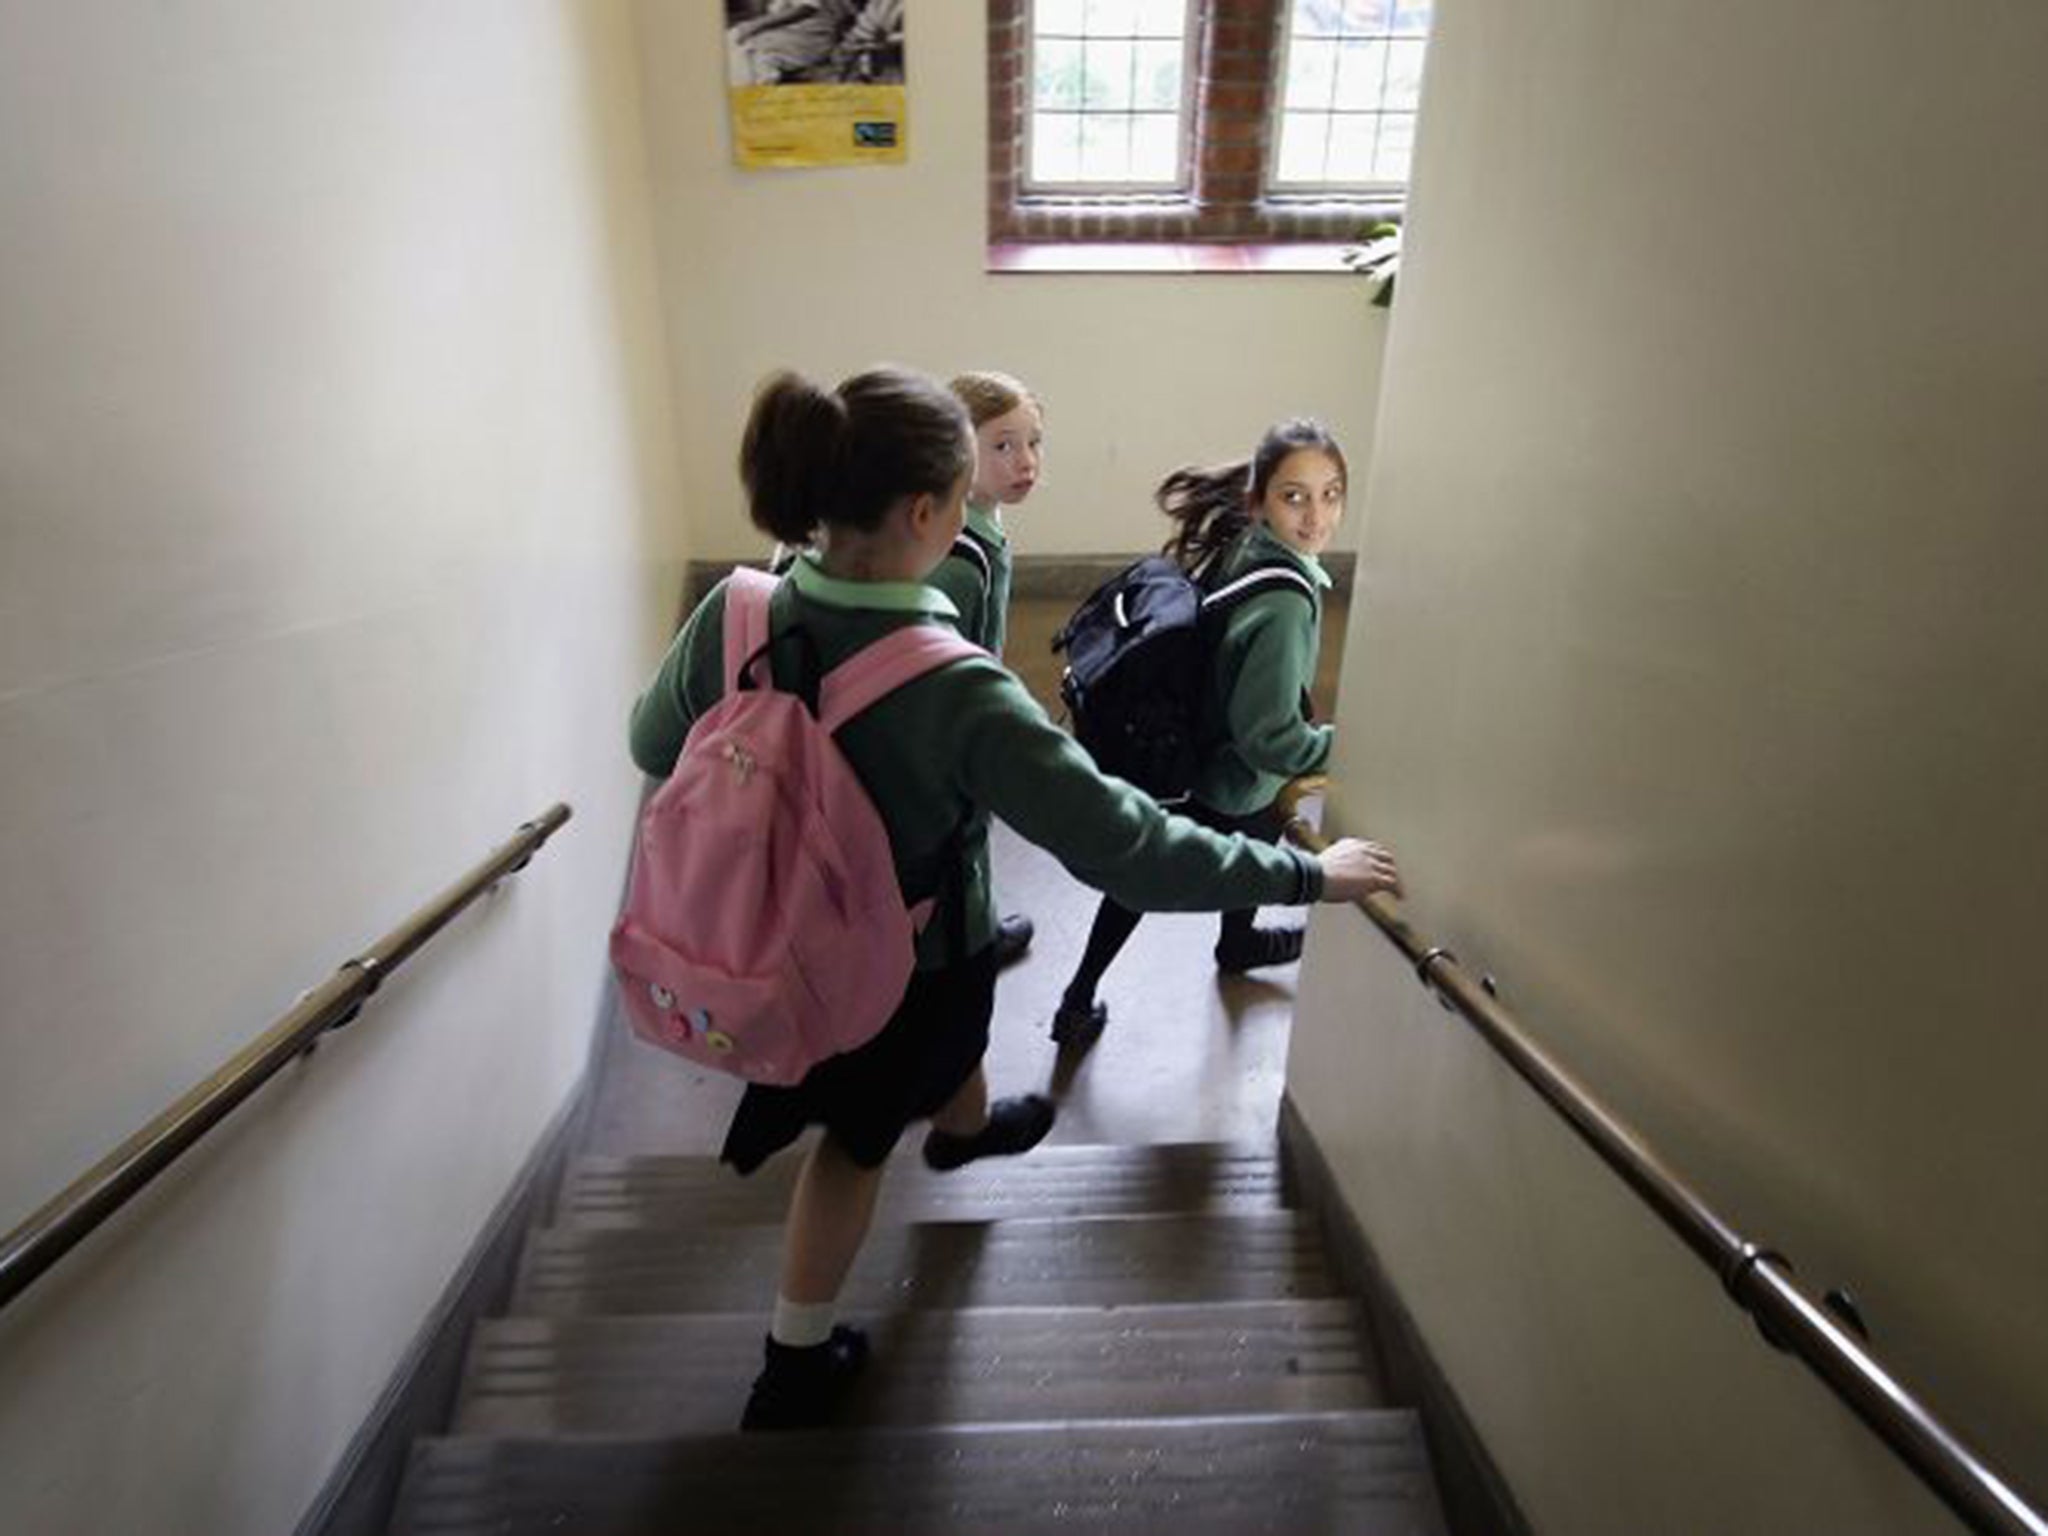 Campaigners believe children need classes that talk about equality